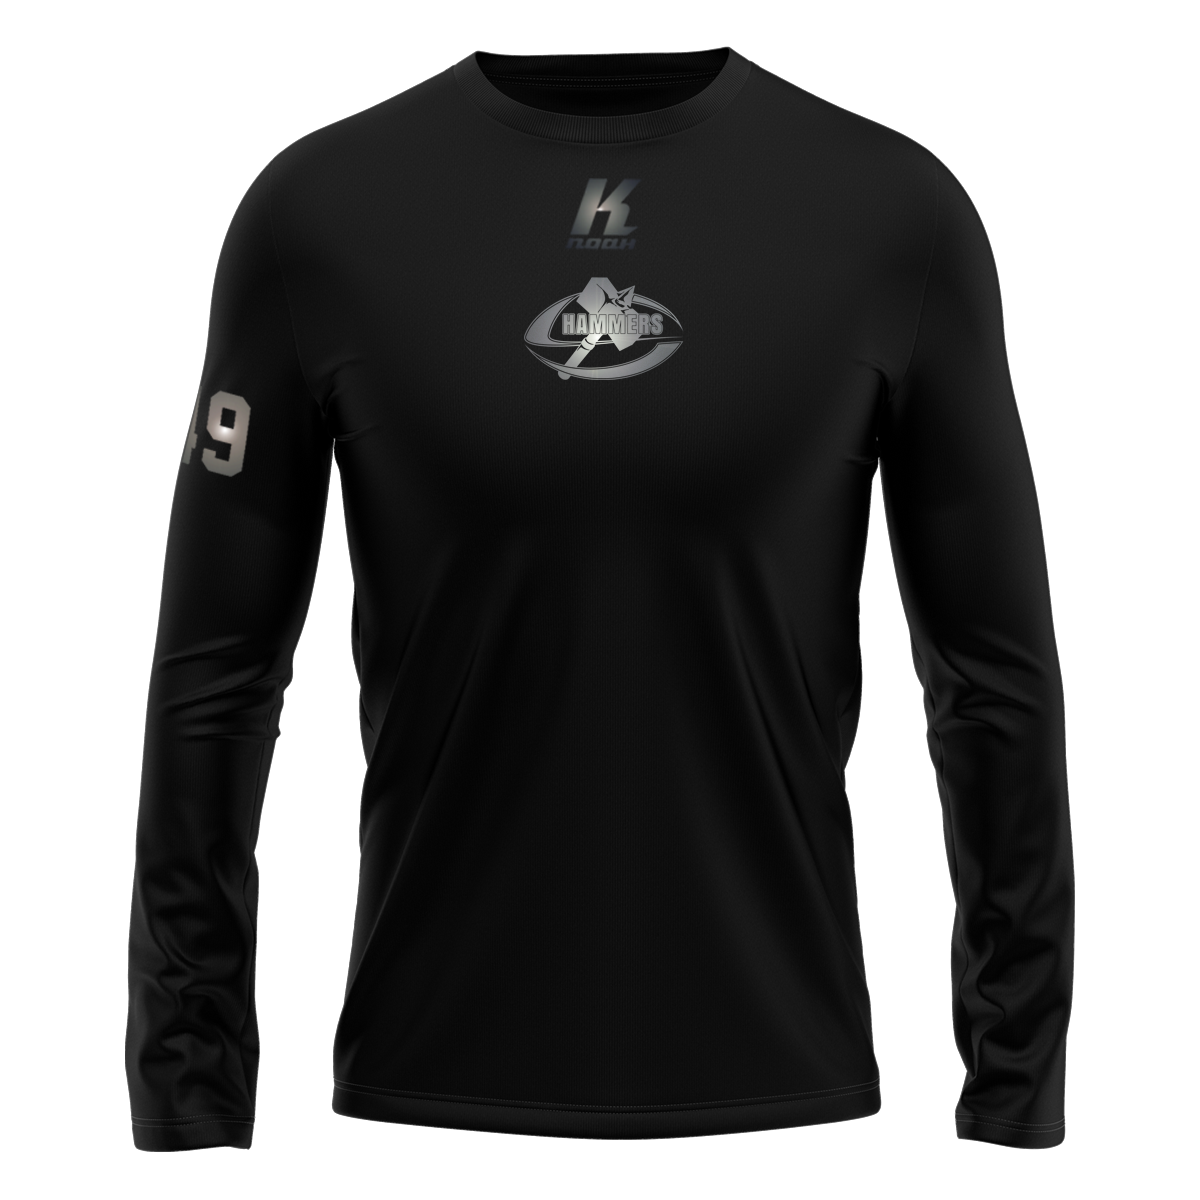 S-Hammers "Blackline" K.Tech Longsleeve Tee L02071 with Playernumber/Initials